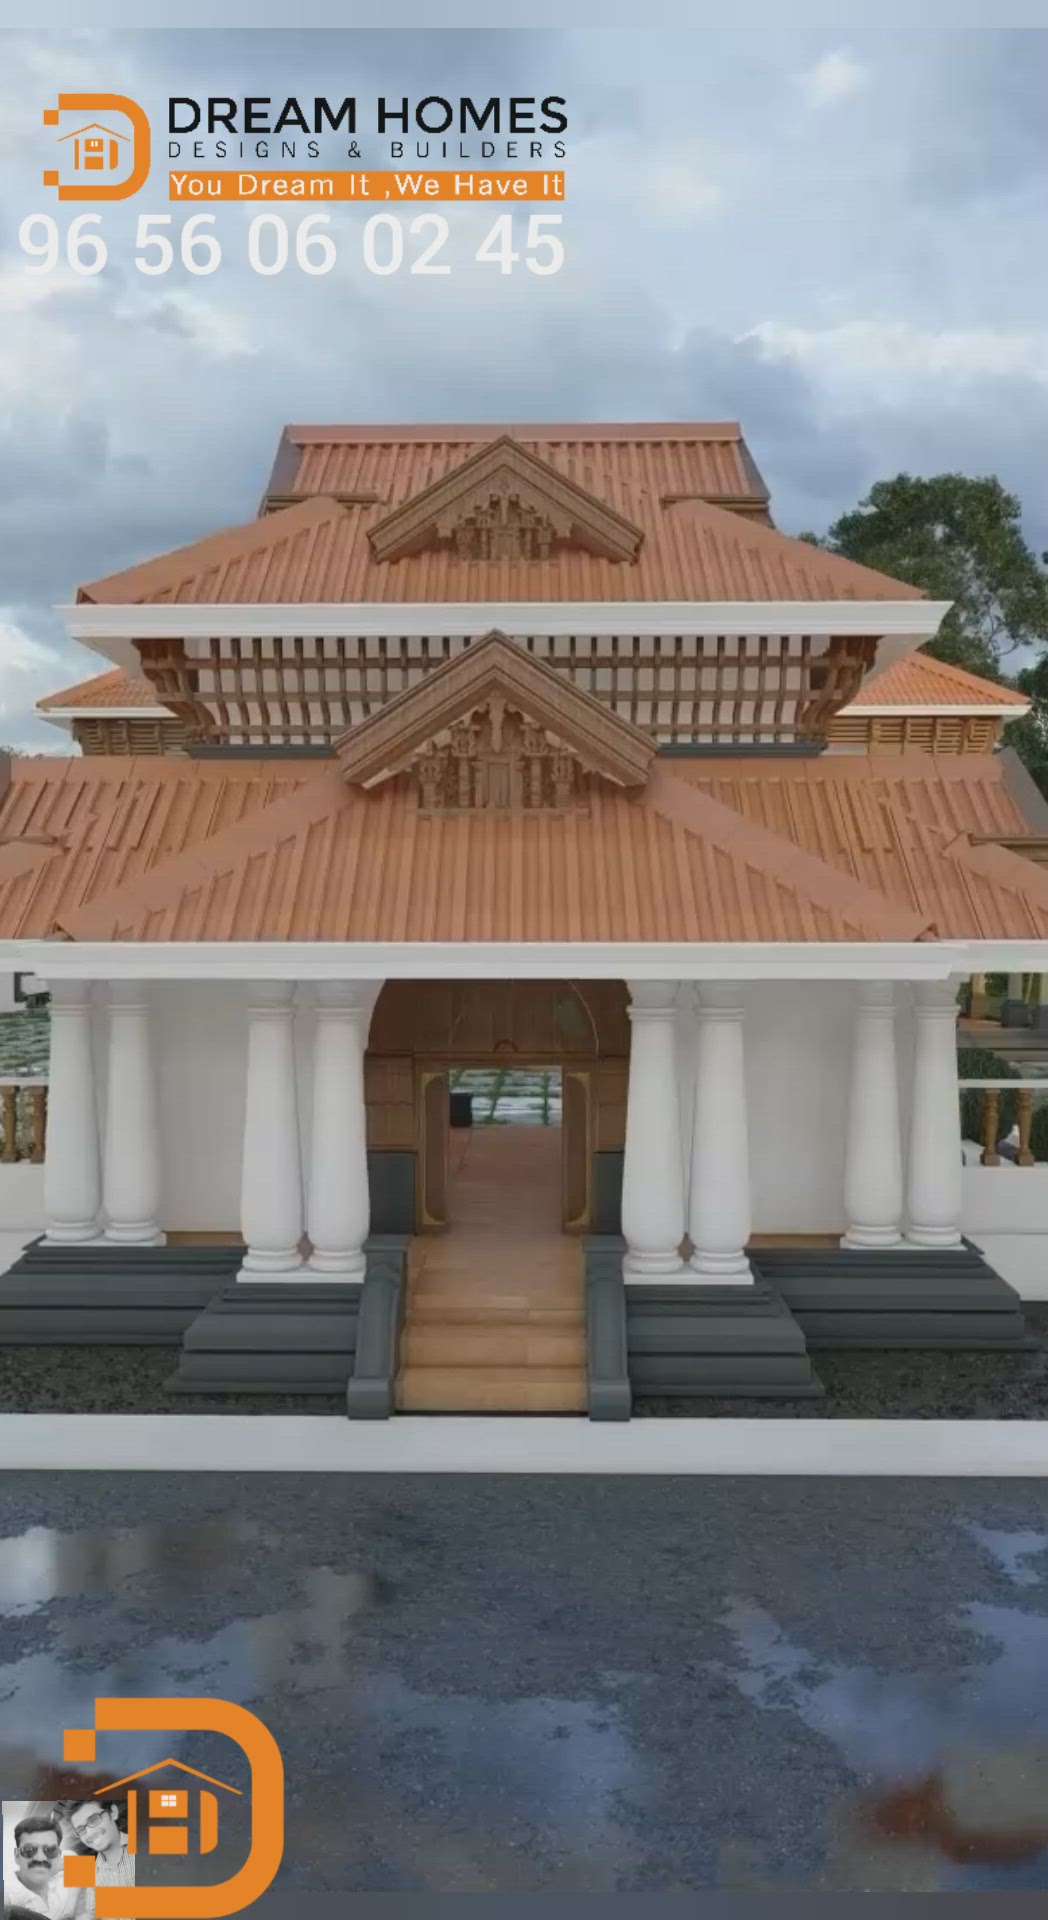 "DREAM HOMES DESIGNS & BUILDERS "
Walking Into NEXT YEAR 🥰.... 2023 💥  
            You Dream It, We Have It'

       "Kerala's No 1 Architect for Traditional Homes"

👇💞🙏7000 sqft മലപ്പുറം ജില്ലയിൽ എടപ്പാളിൽ വർക്ക്‌ പുരോഗമിക്കുന്നു💞🙏

#traditionalhome #traditional

No Compromise on Quality, Sincerity & Efficiency.
For more info

9656060245
7902453187

www.dreamhomesbuilders.com
For more info 
9656060245
7902453187